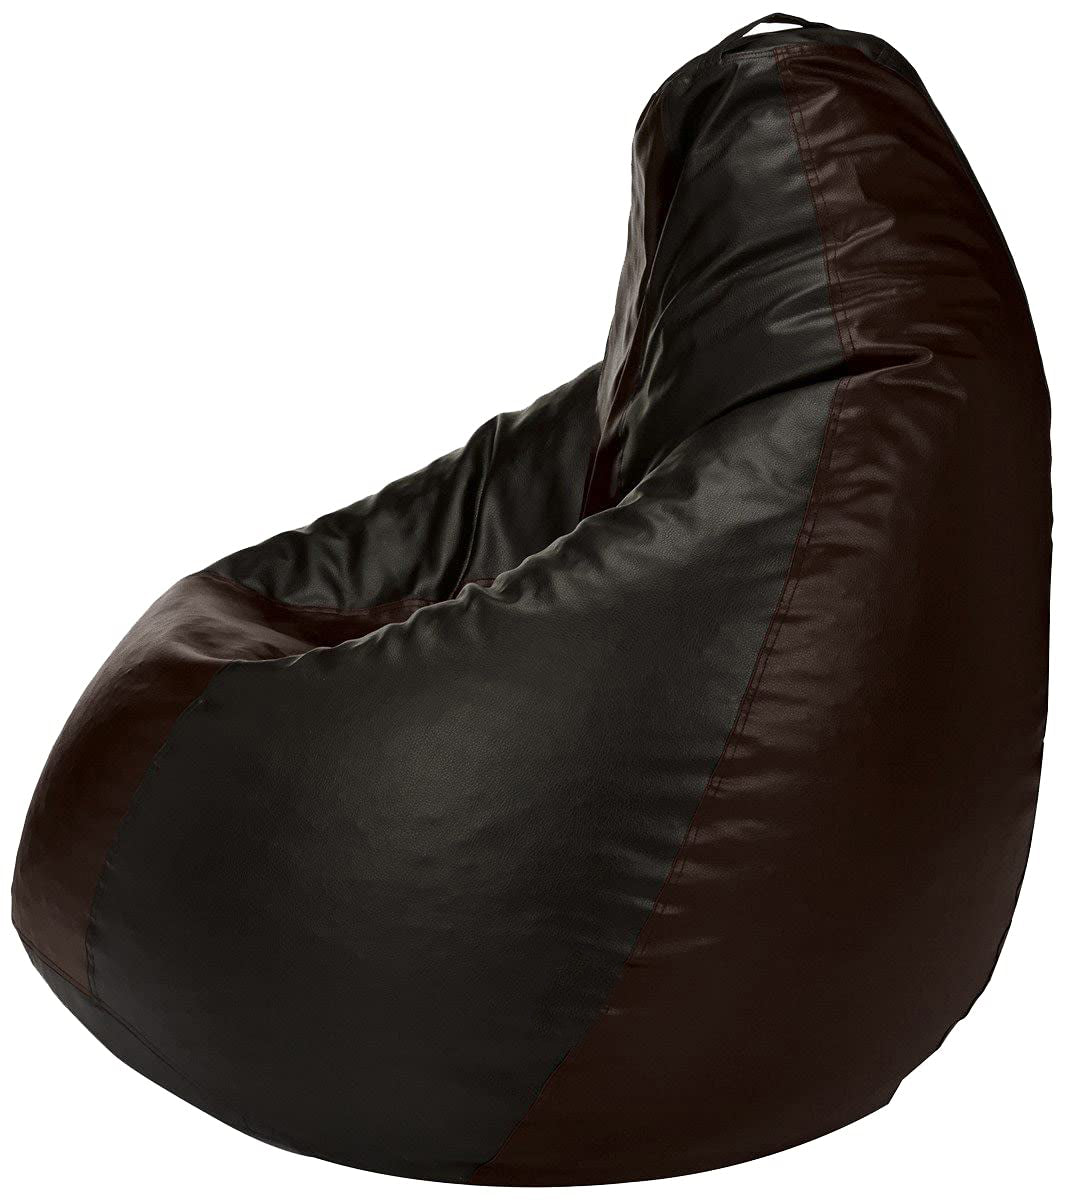 HDC Super Lama Leather Bean Bag Cover Without Beans (Black & Brown) - HDC.IN